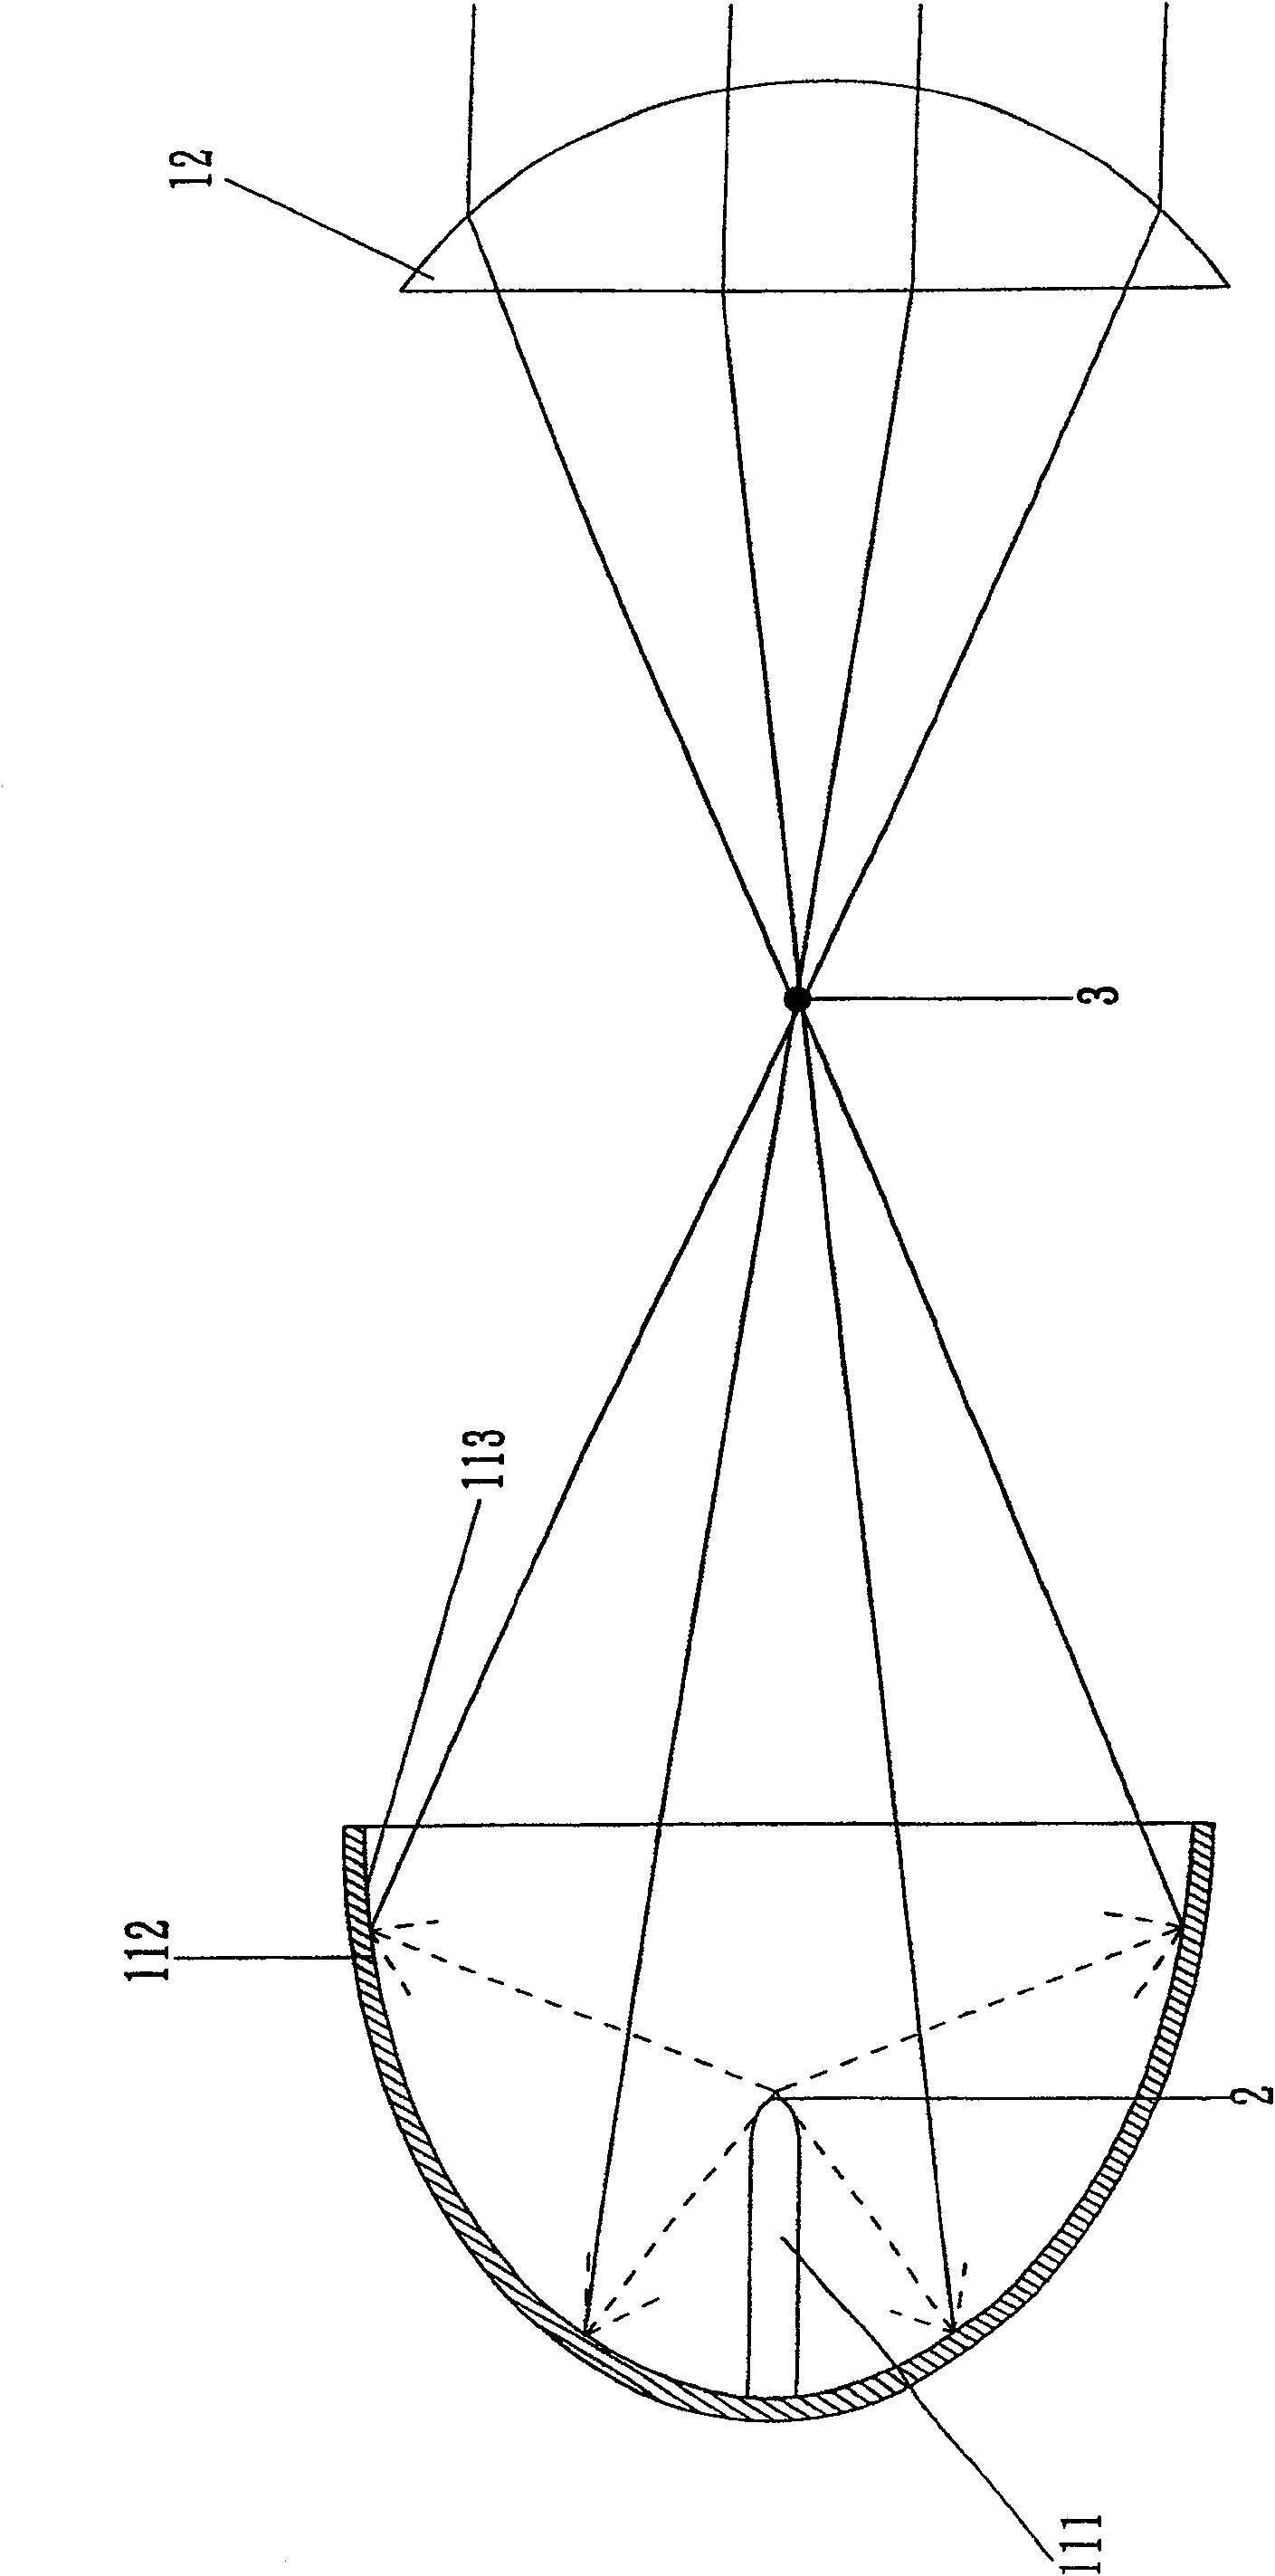 Projection type optical system structure